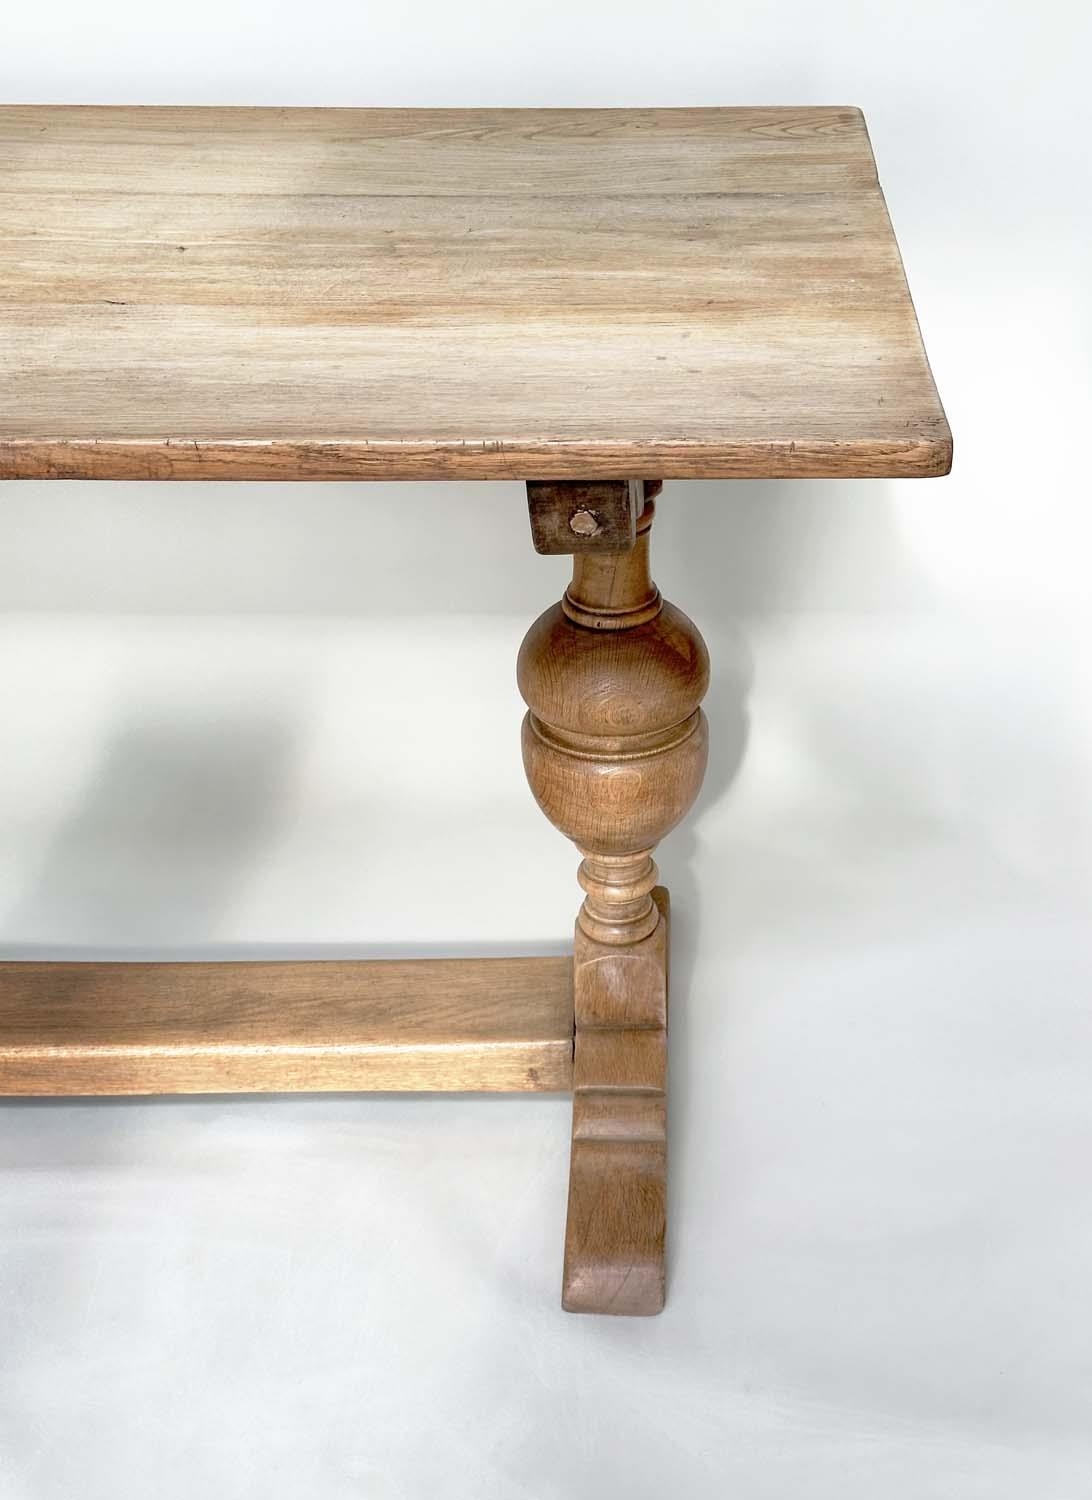 REFECTORY TABLE, early English style oak with planked top, cup and cover turned pillar trestles - Image 2 of 12